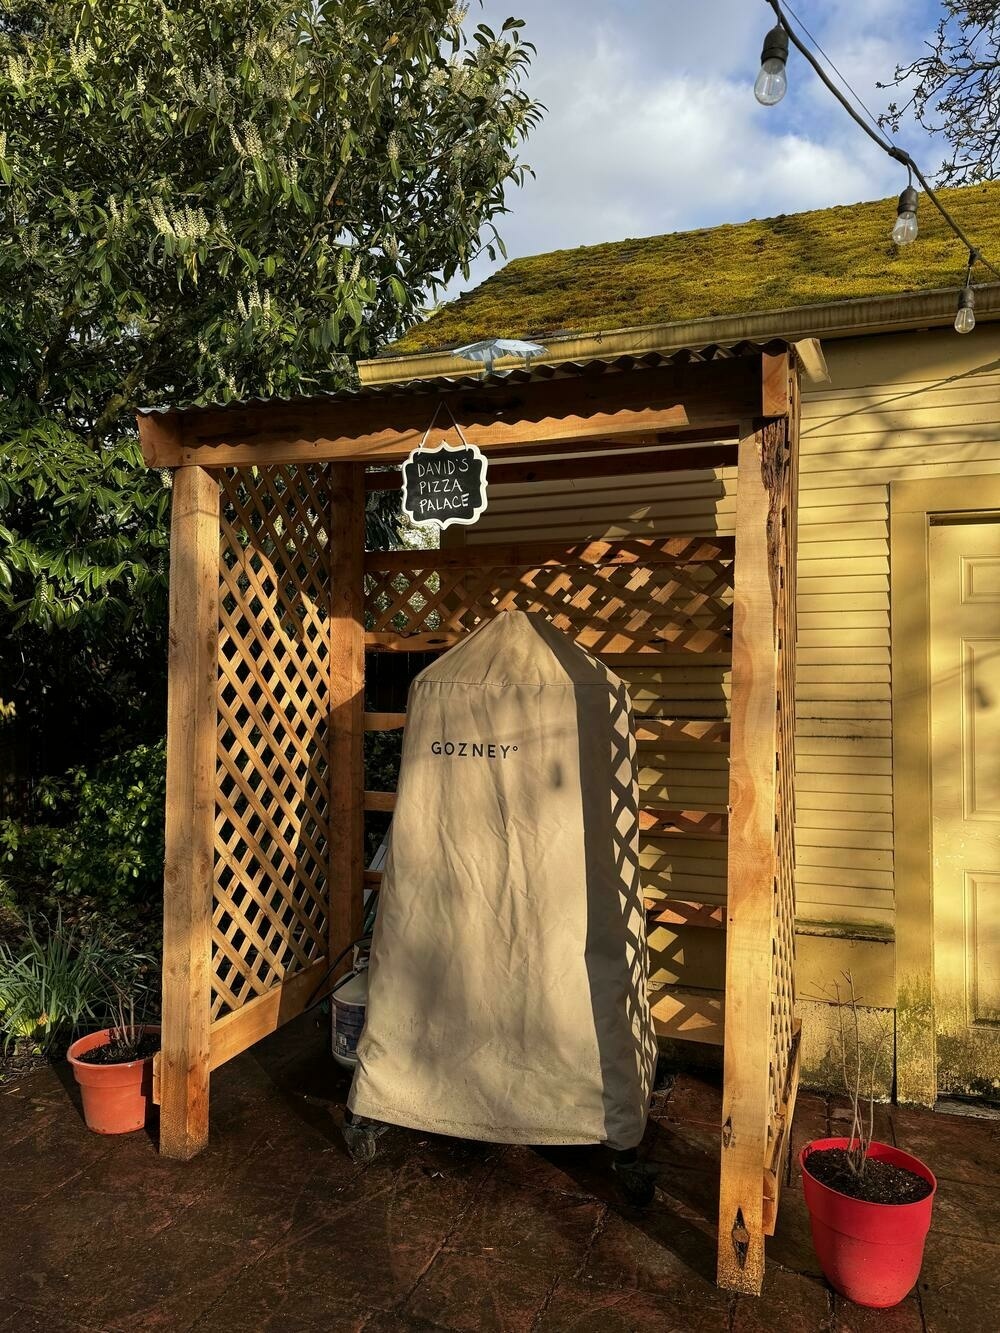 A wooden structure built to cover my outdoor pizza oven, with latticed sides and a corrugated tin roof with built-in ventilation. A small sign hangs from the top that says, in chalk, “David’s Pizza Palace”